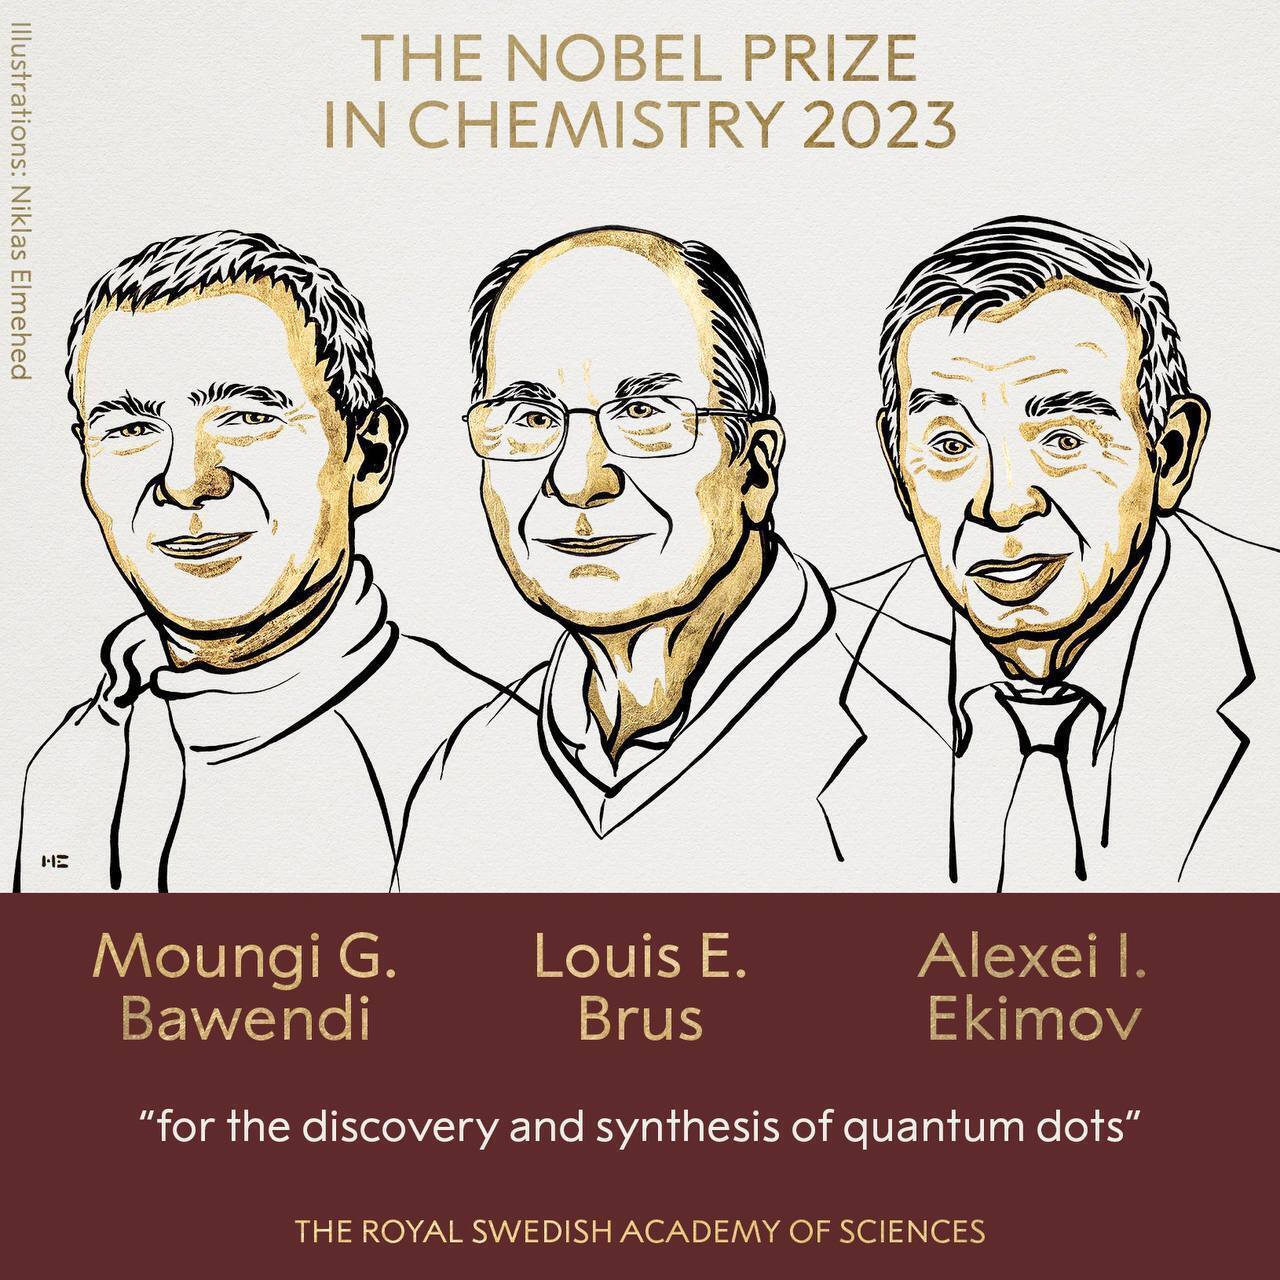 Three scientists win the prize